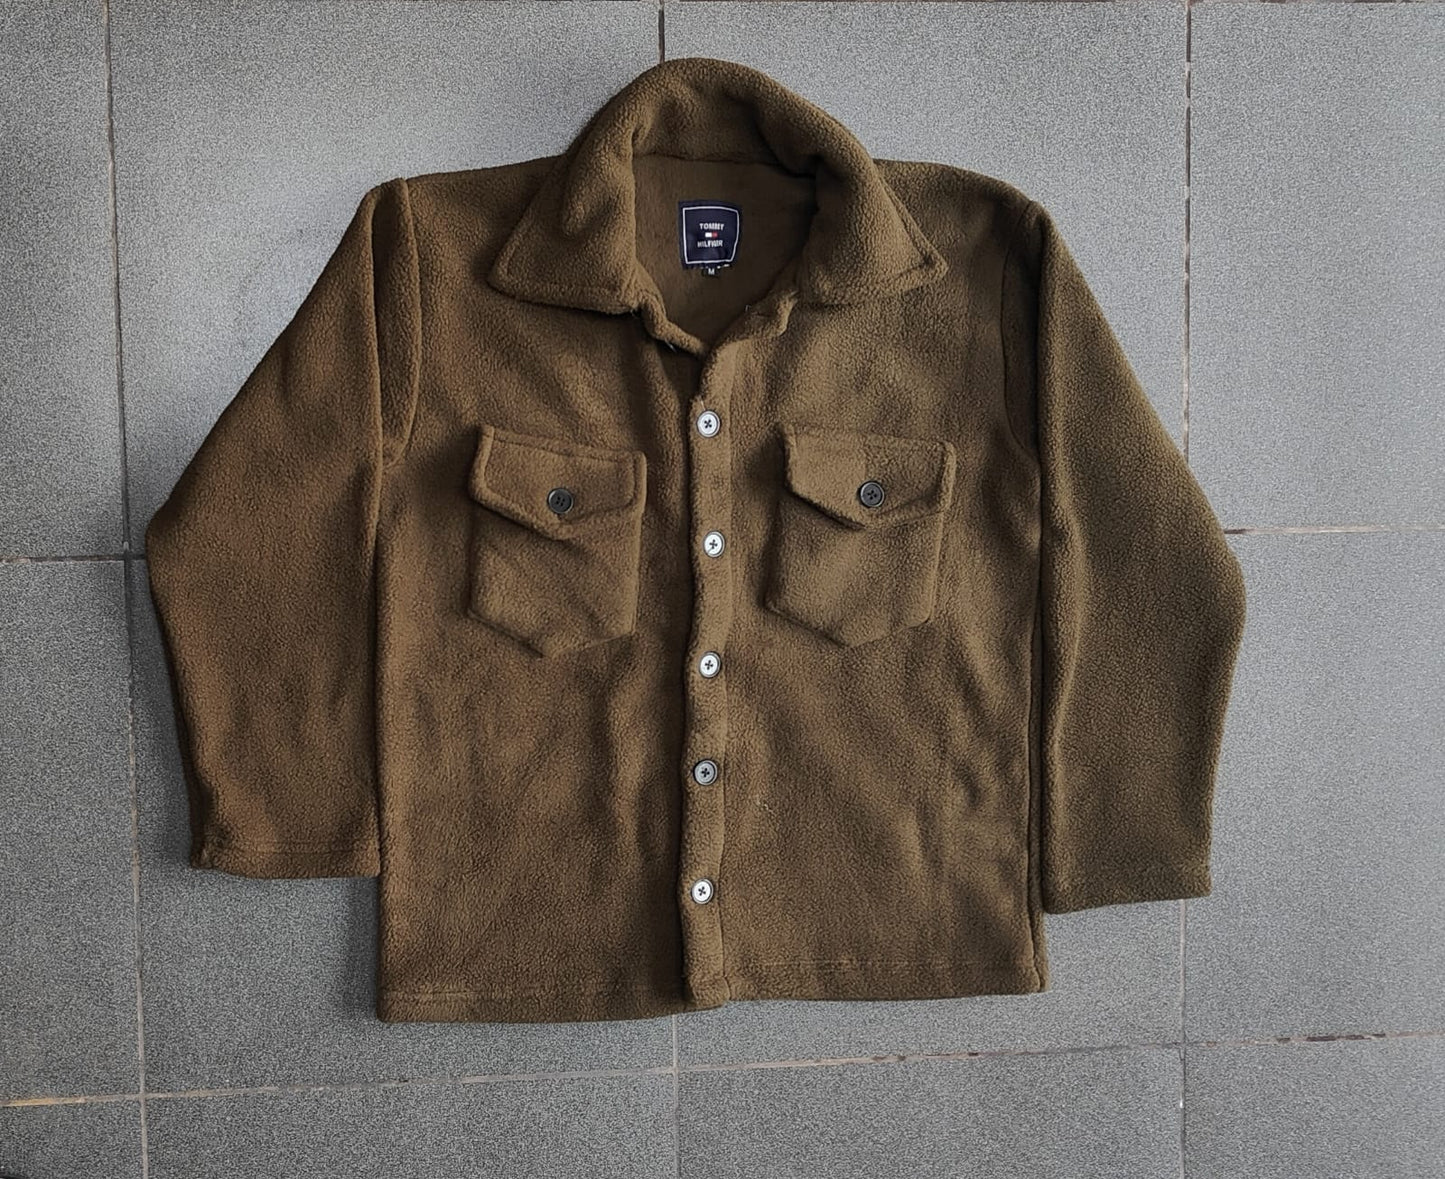 Wool Shirts for winters